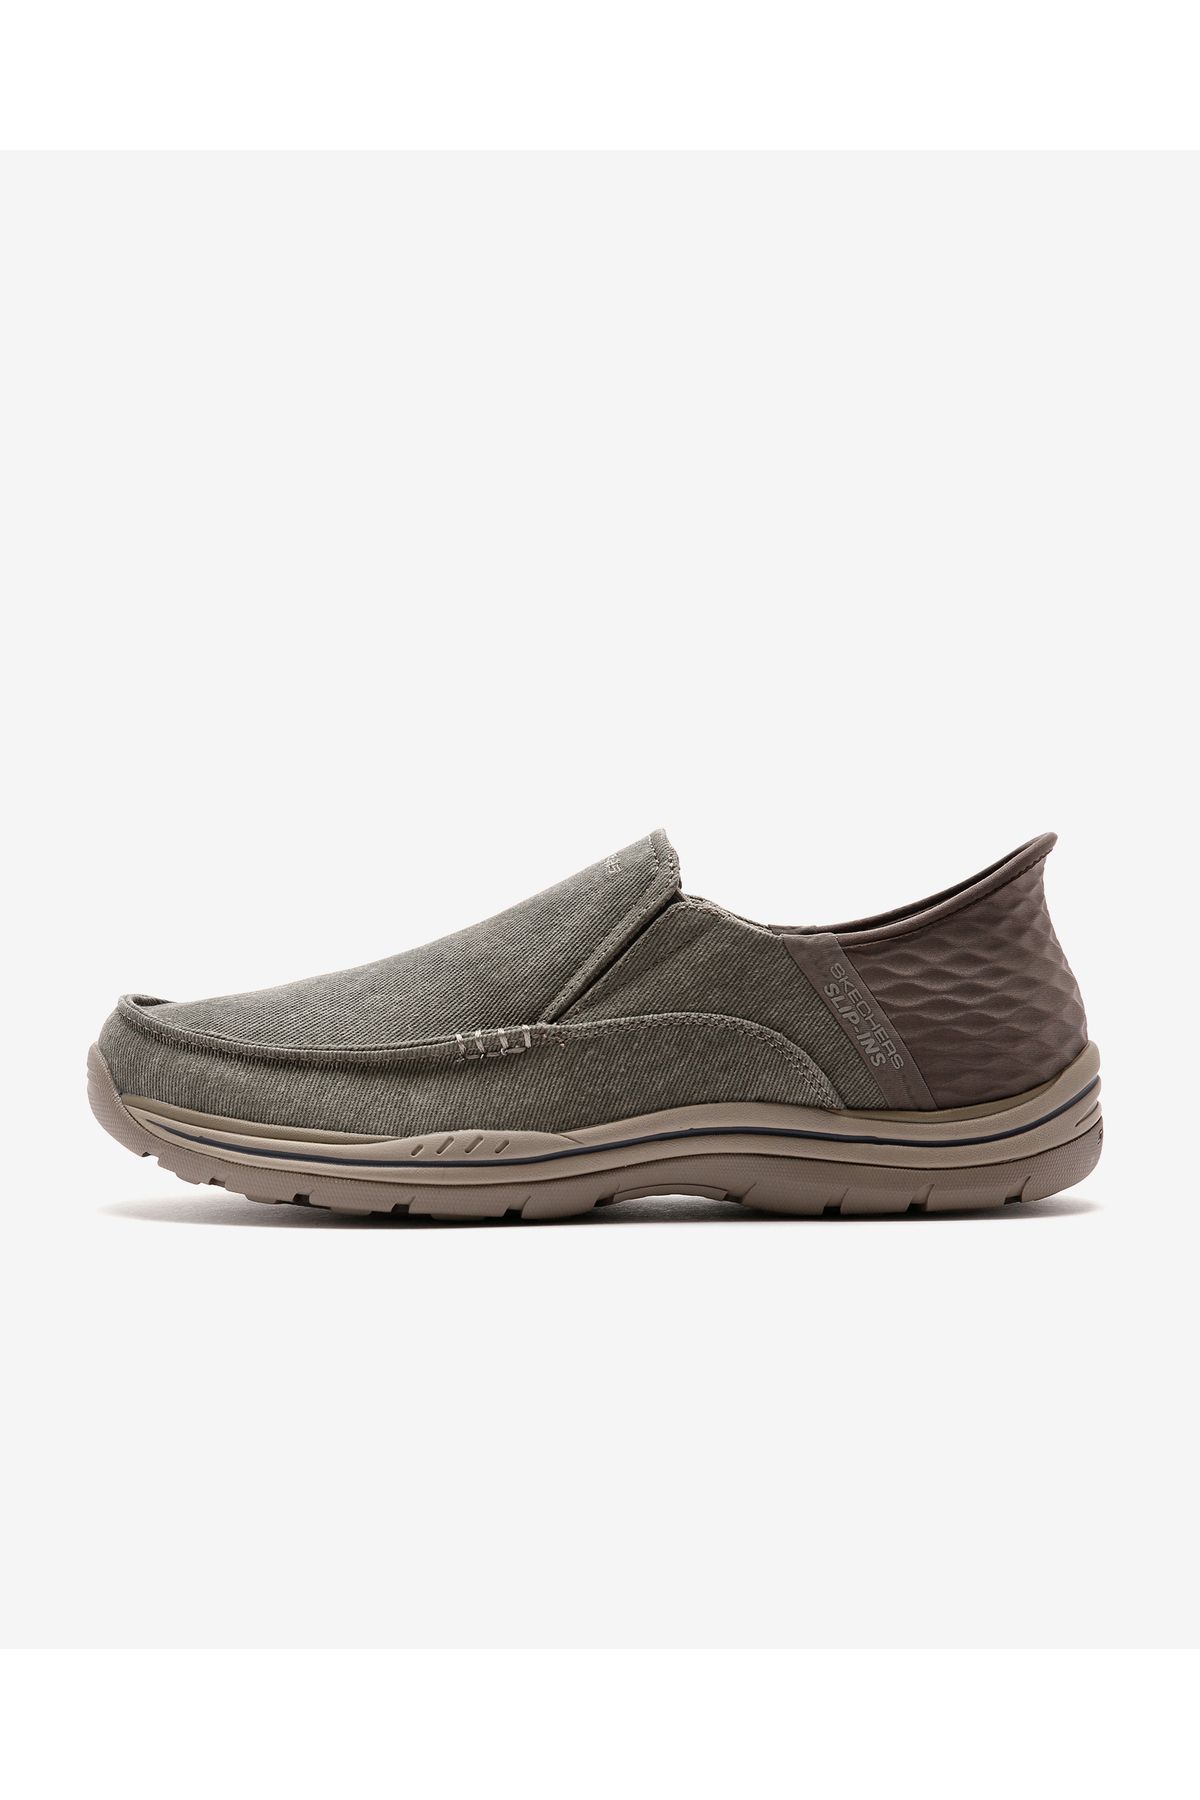 Skechers كفش كتانى اسپرت مردانه مدل expected cayson